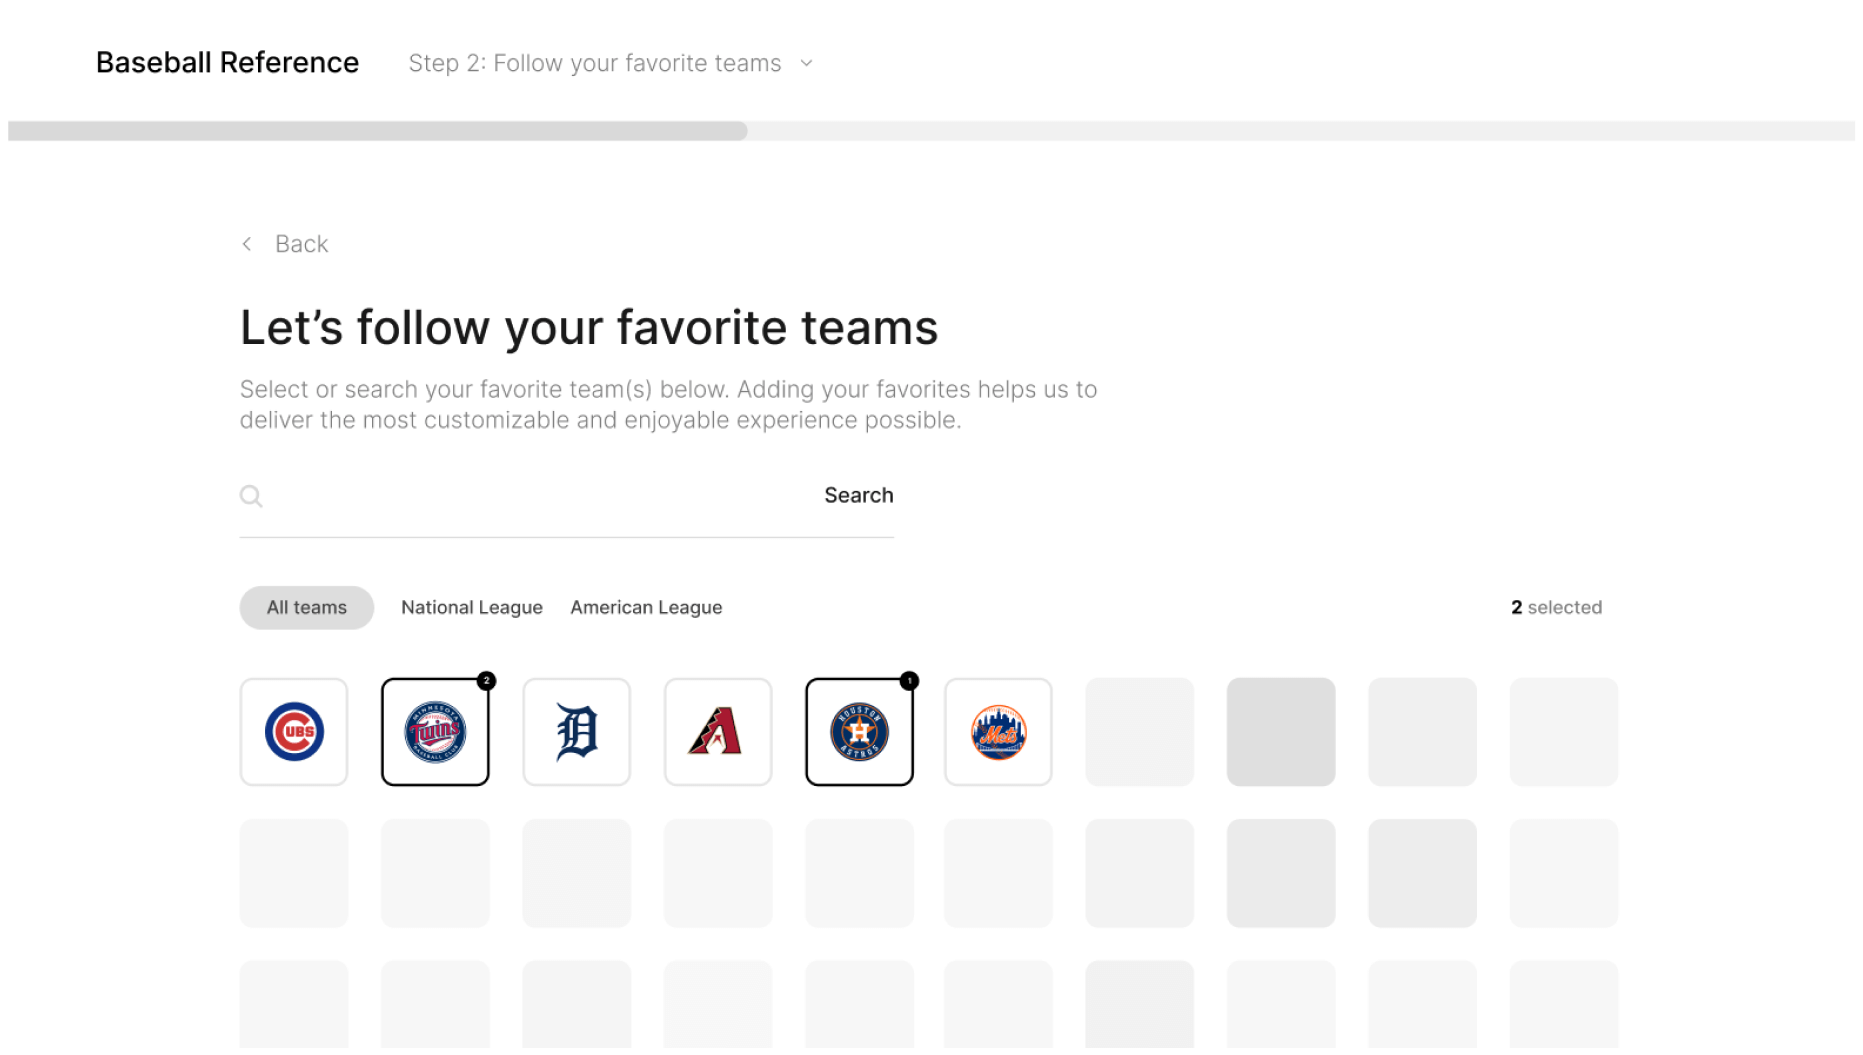 Low-fidelity onboarding concept that allows users to select their favorite players and recieve custom information based on their selections.